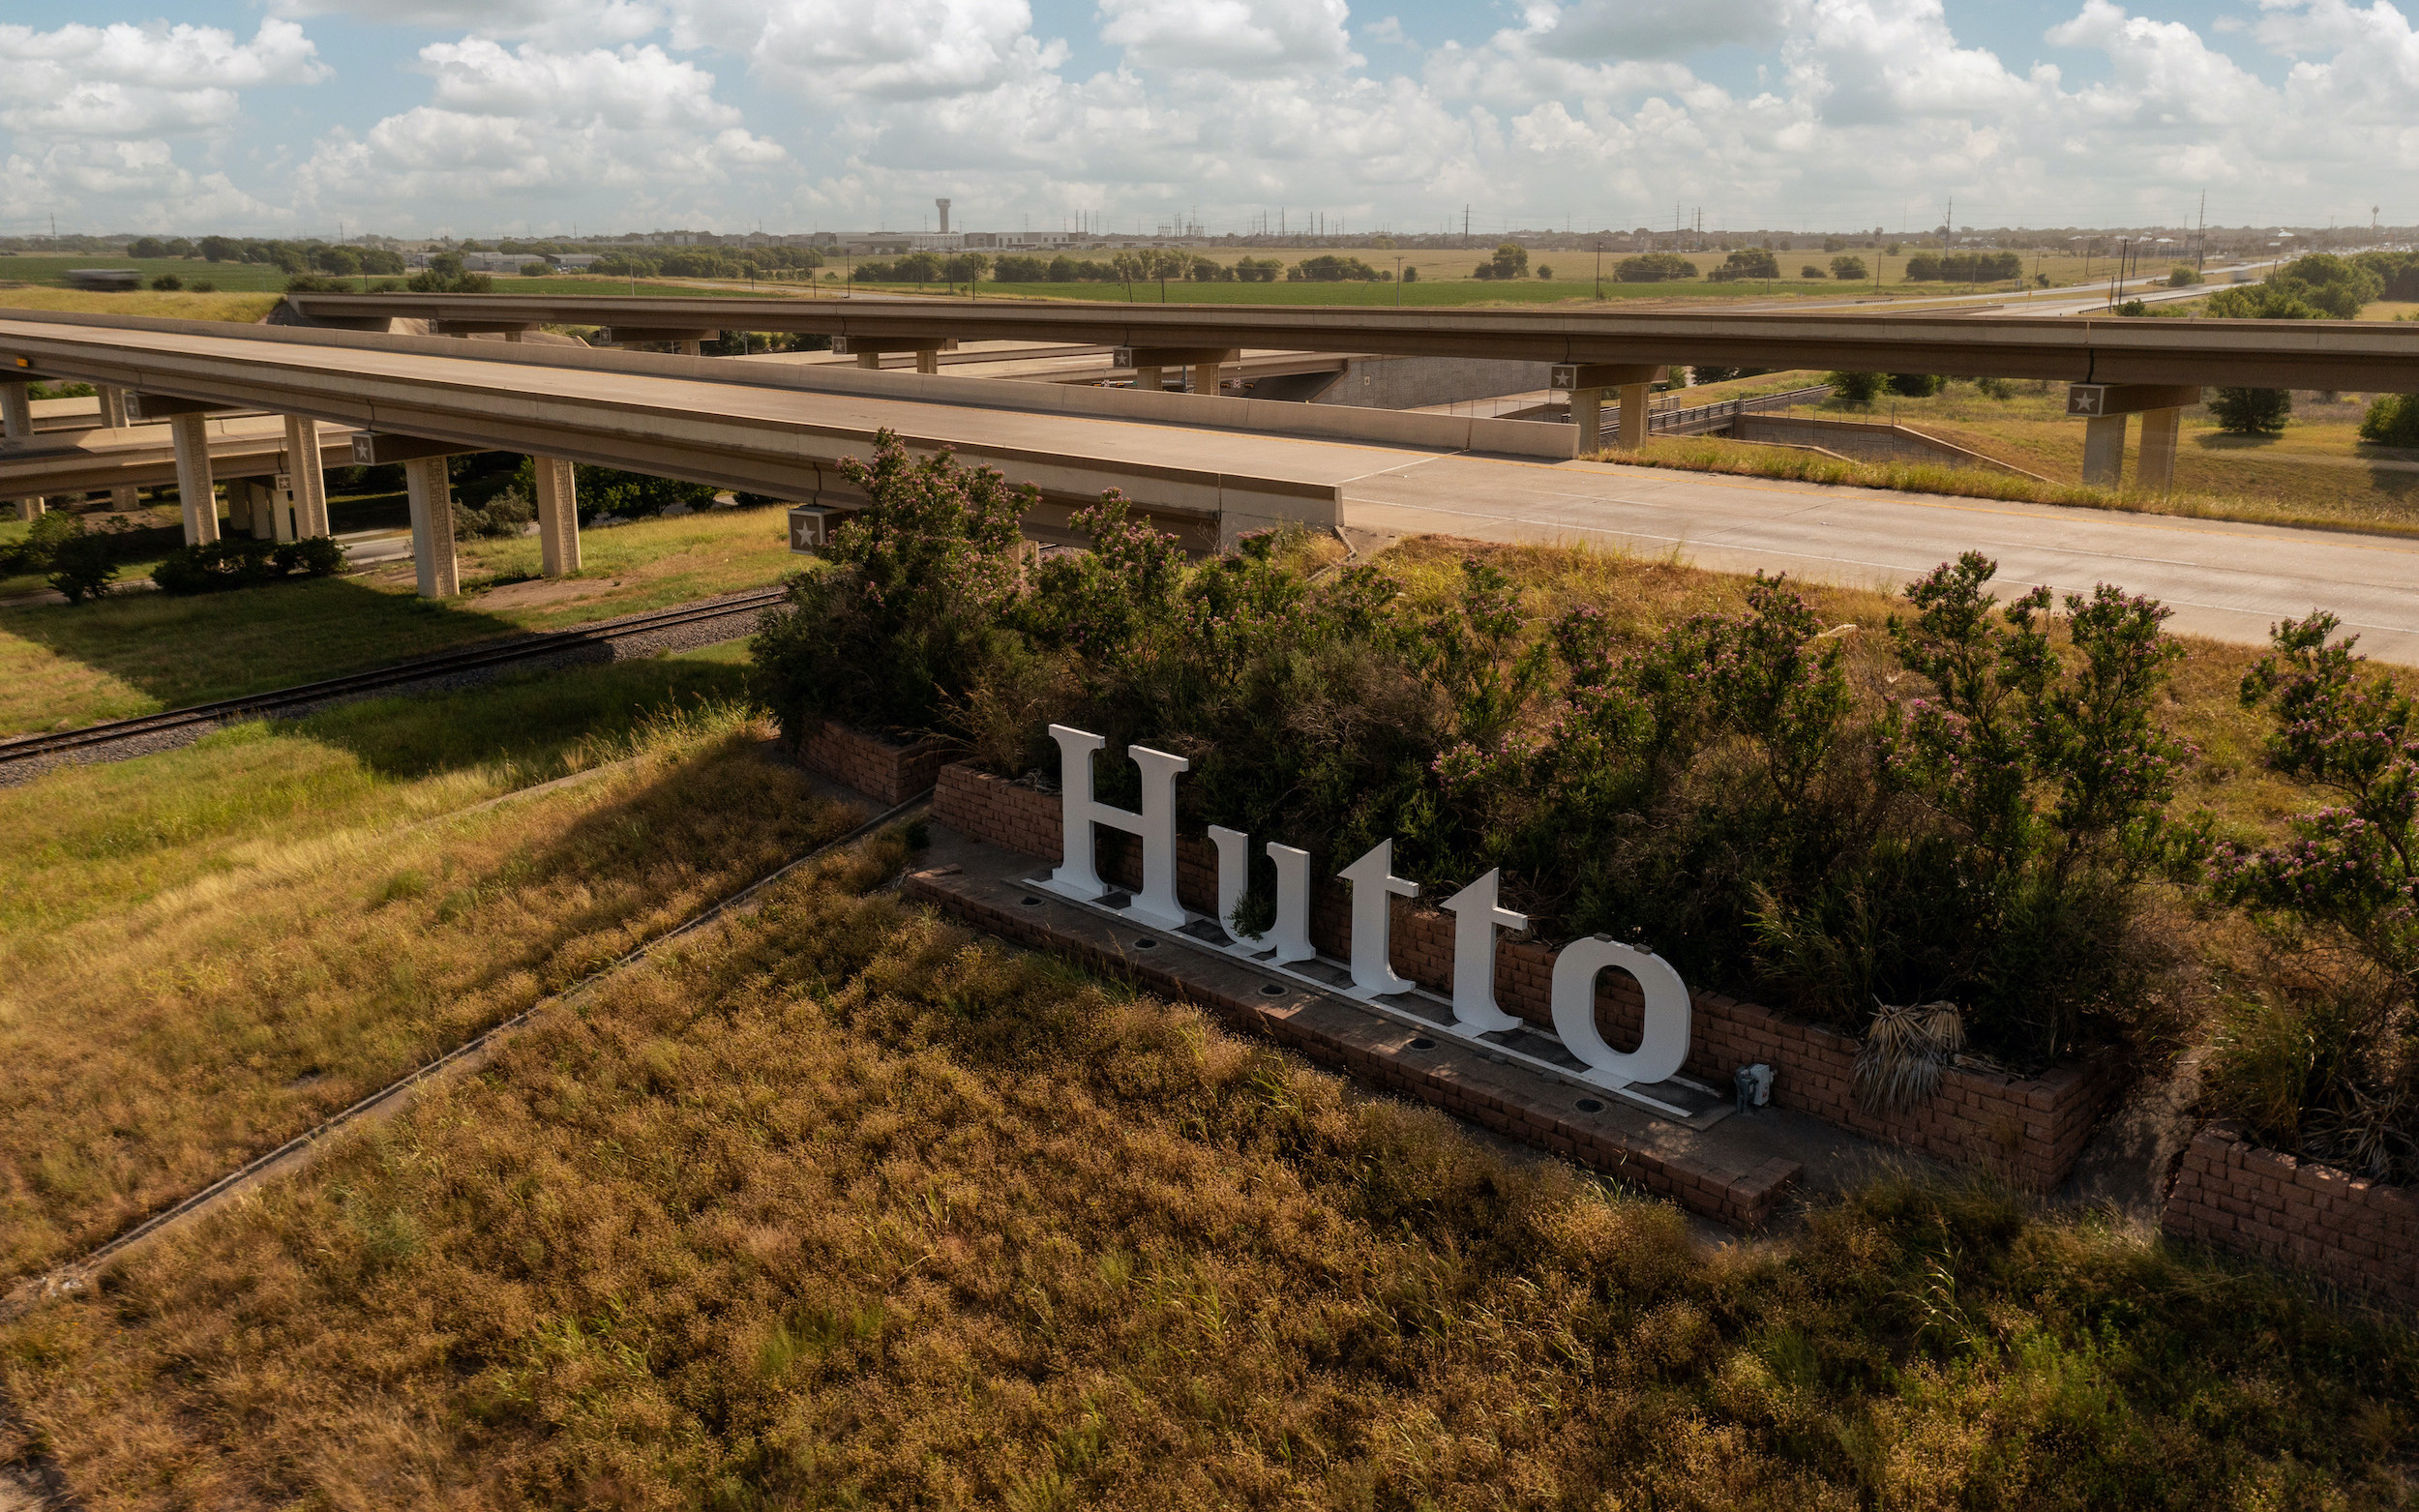 Hutto city sign with highway in the background